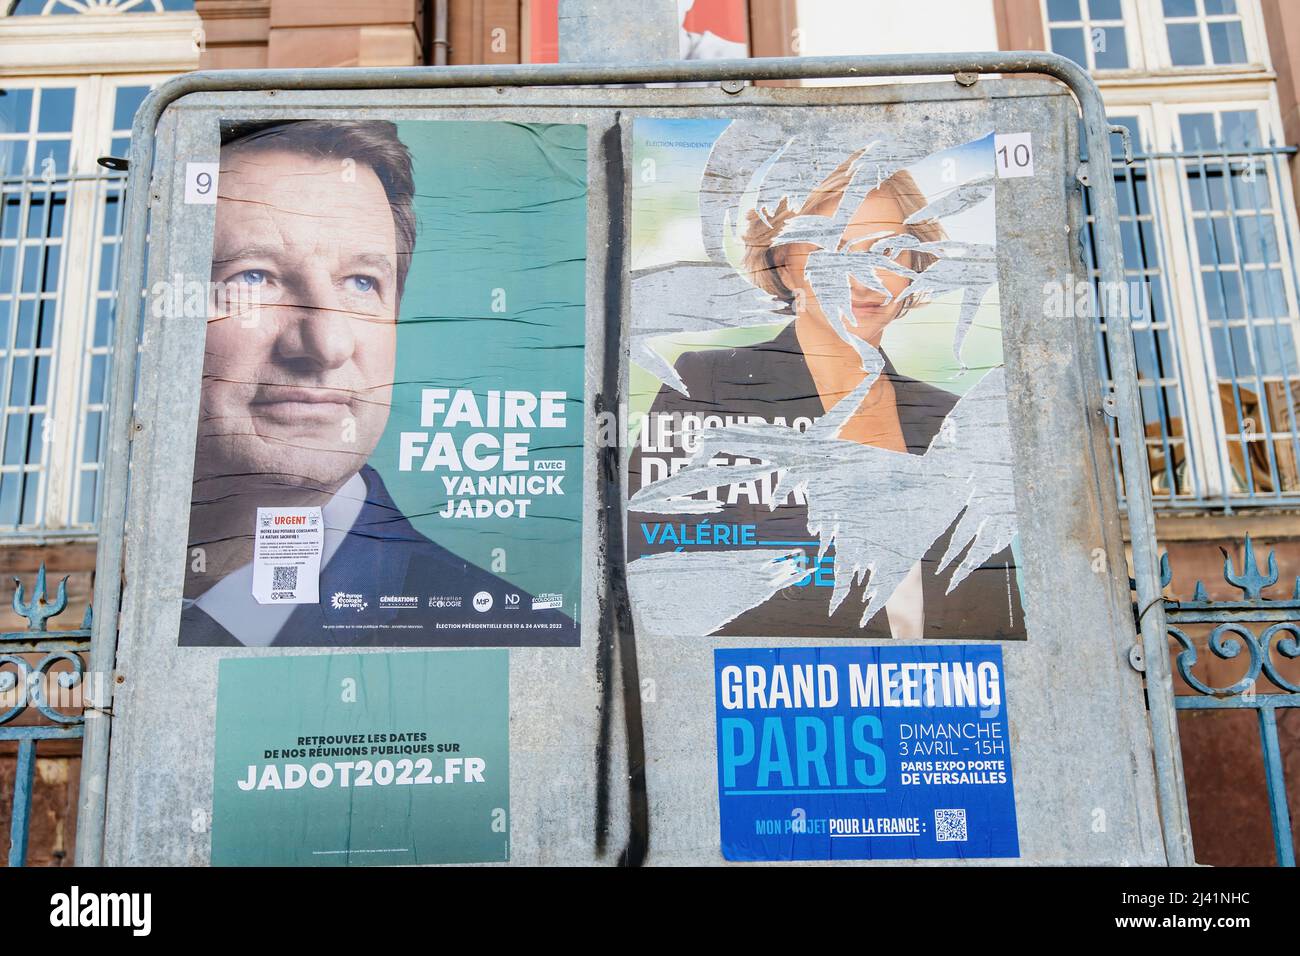 STRASBOURG, FRANCE - APR 23, 2022: French presidential posters for the upcoming presidential election in France, in front of the City Hall building in Strasbourg featuring Valerie Petrasse and Yannick Jadot Stock Photo